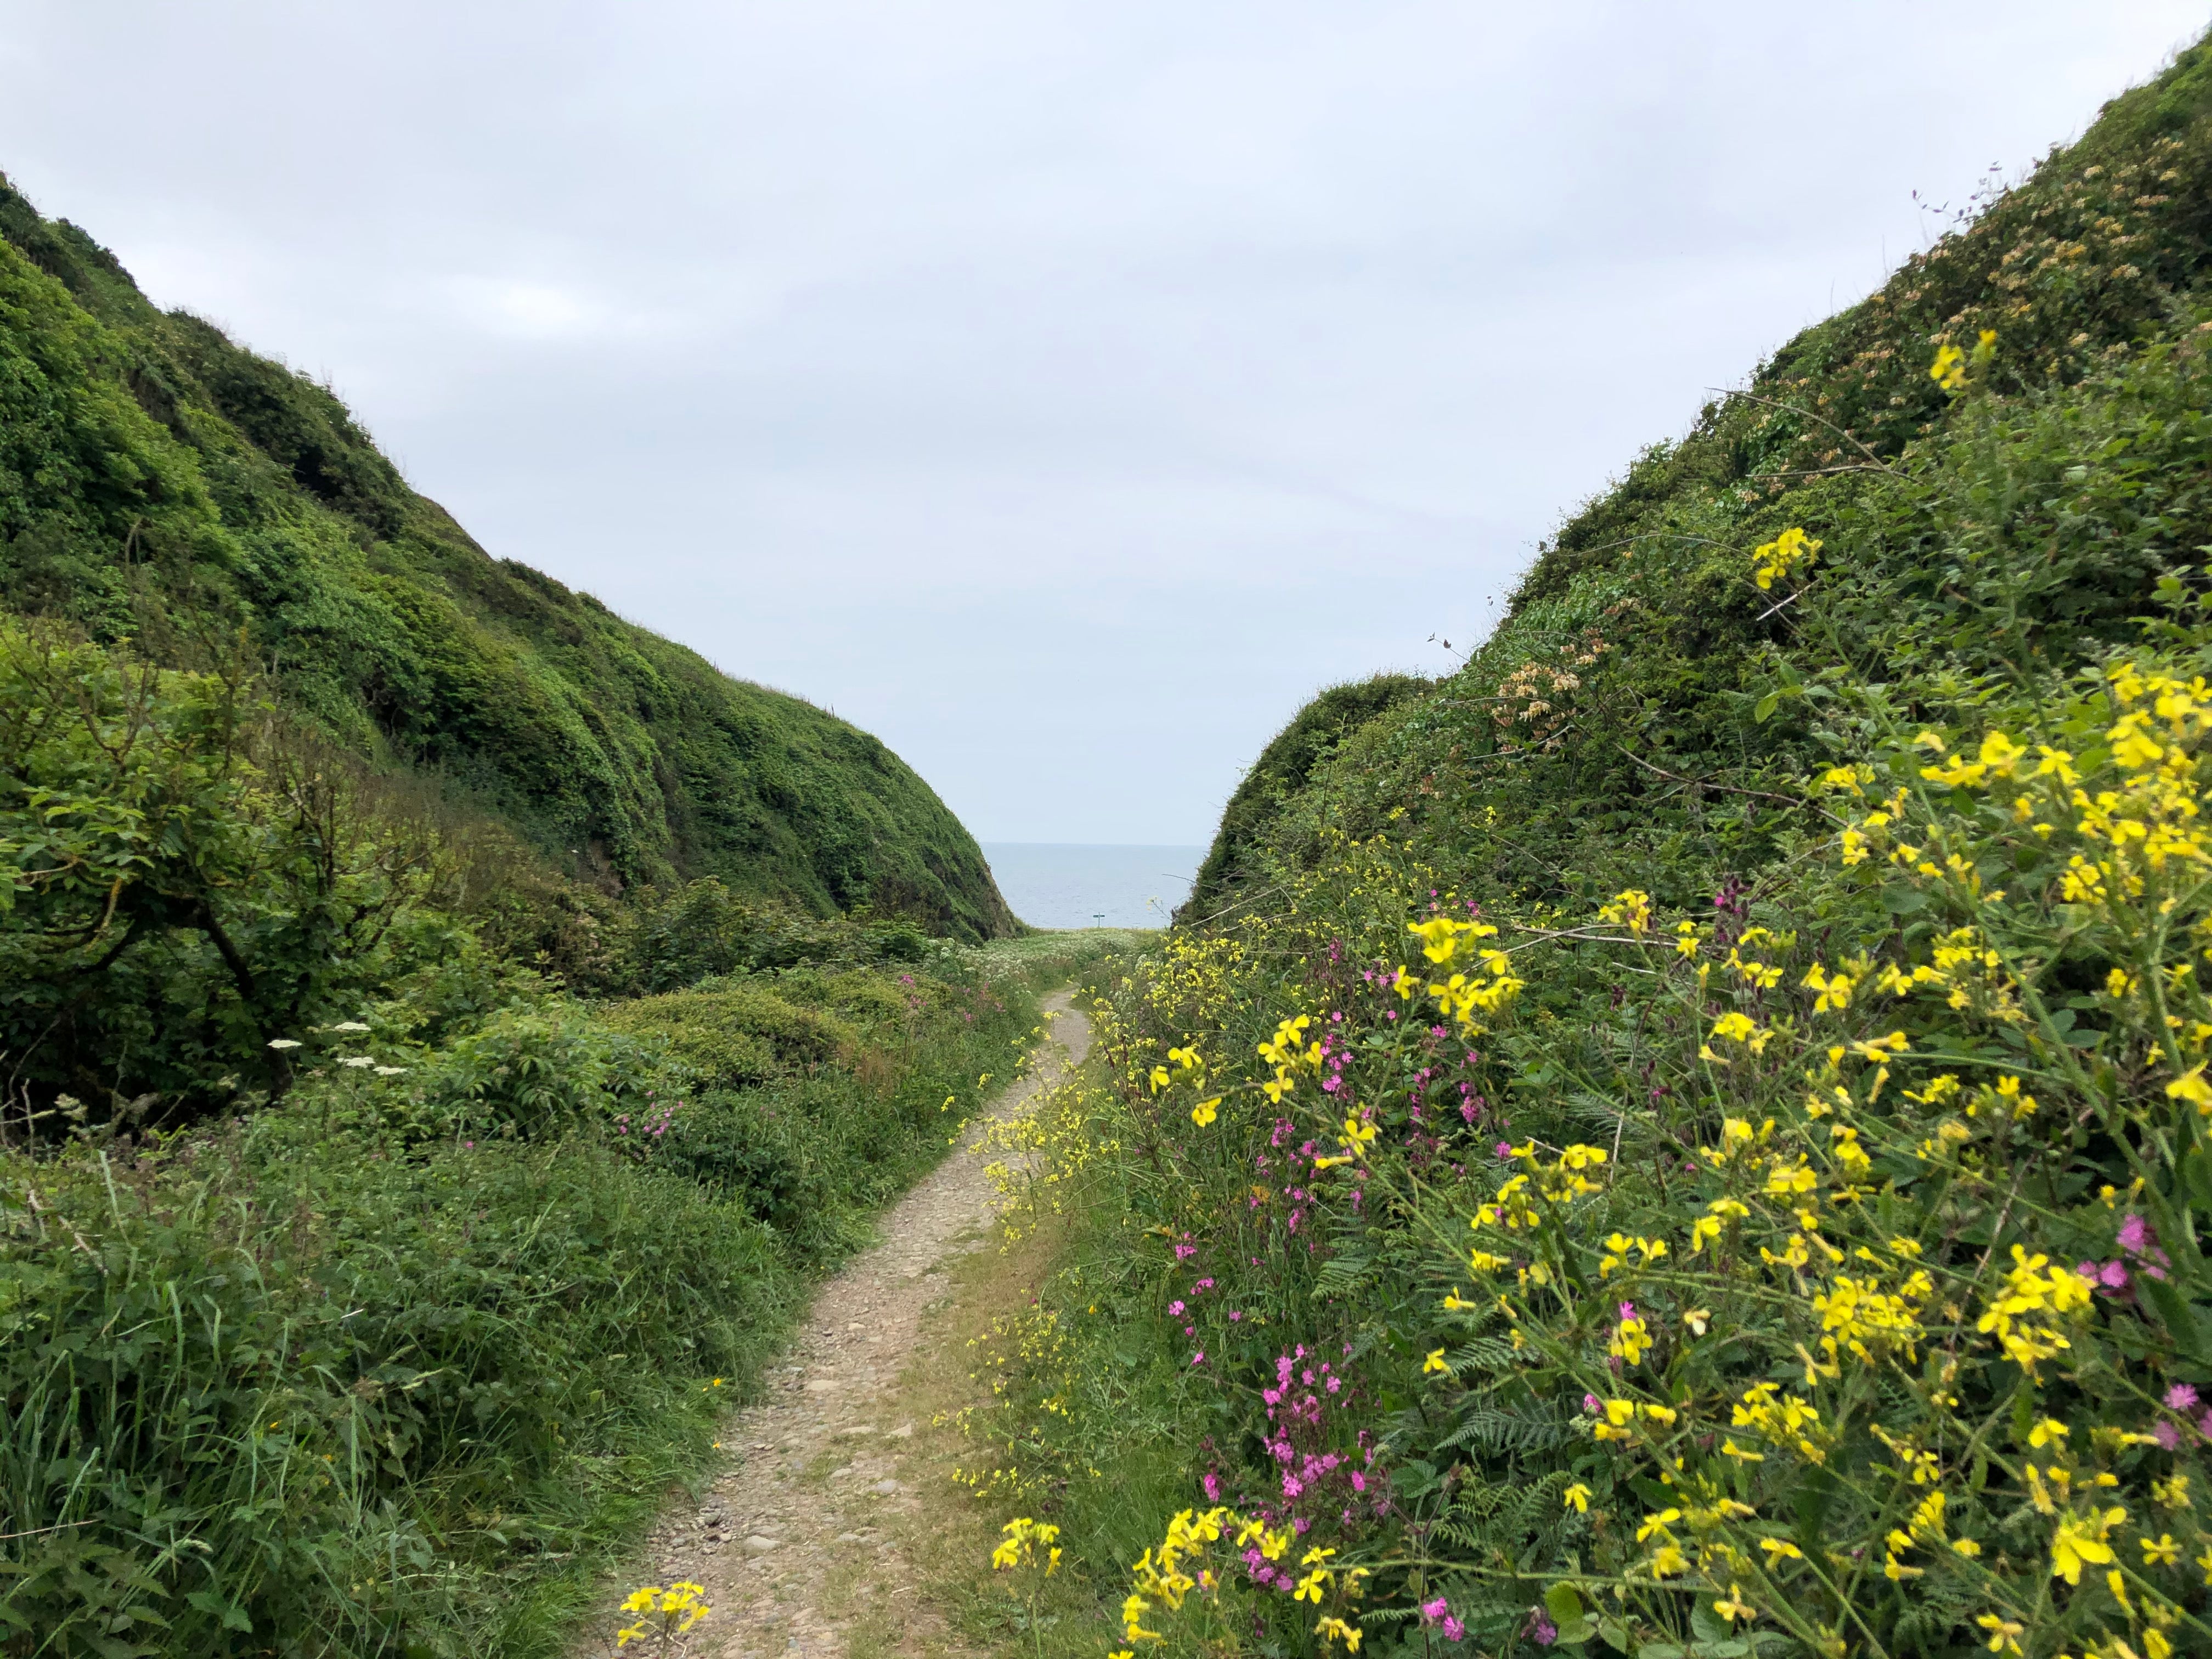 The path to St Ninian’s Cave